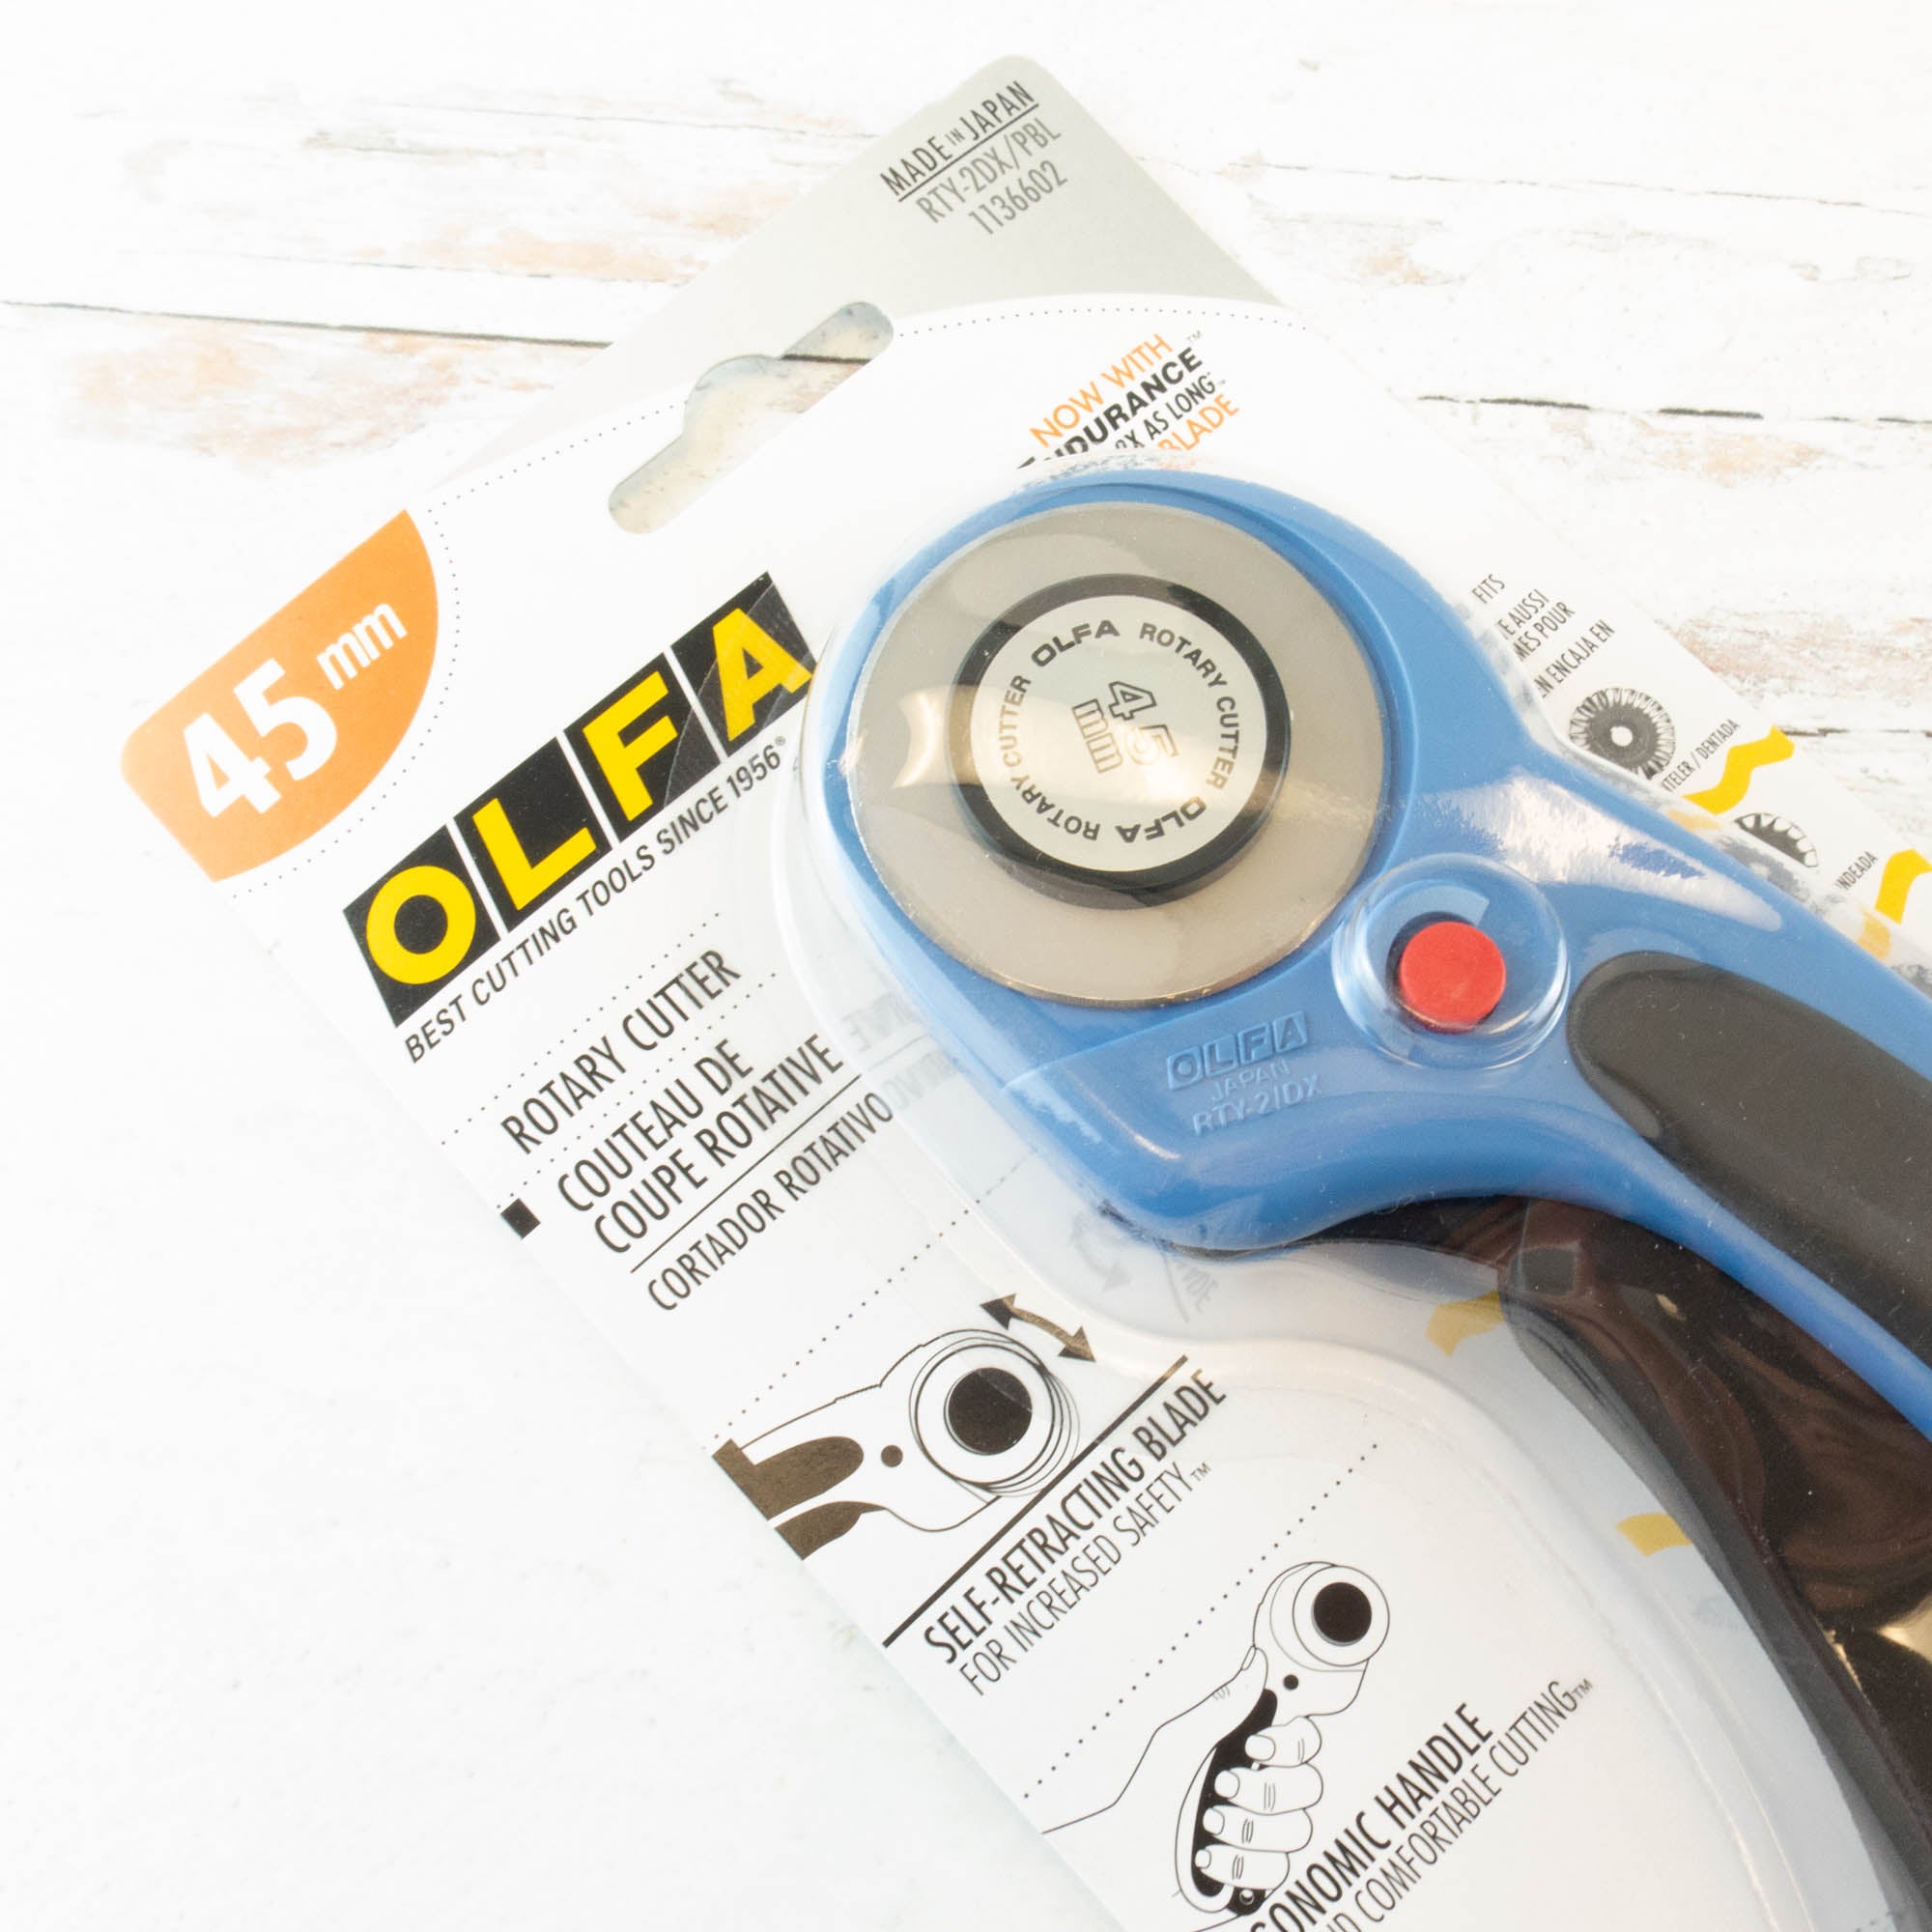 Olfa Rotary Cutters are perfect for sewing, quilting, crafting and  embroidery projects